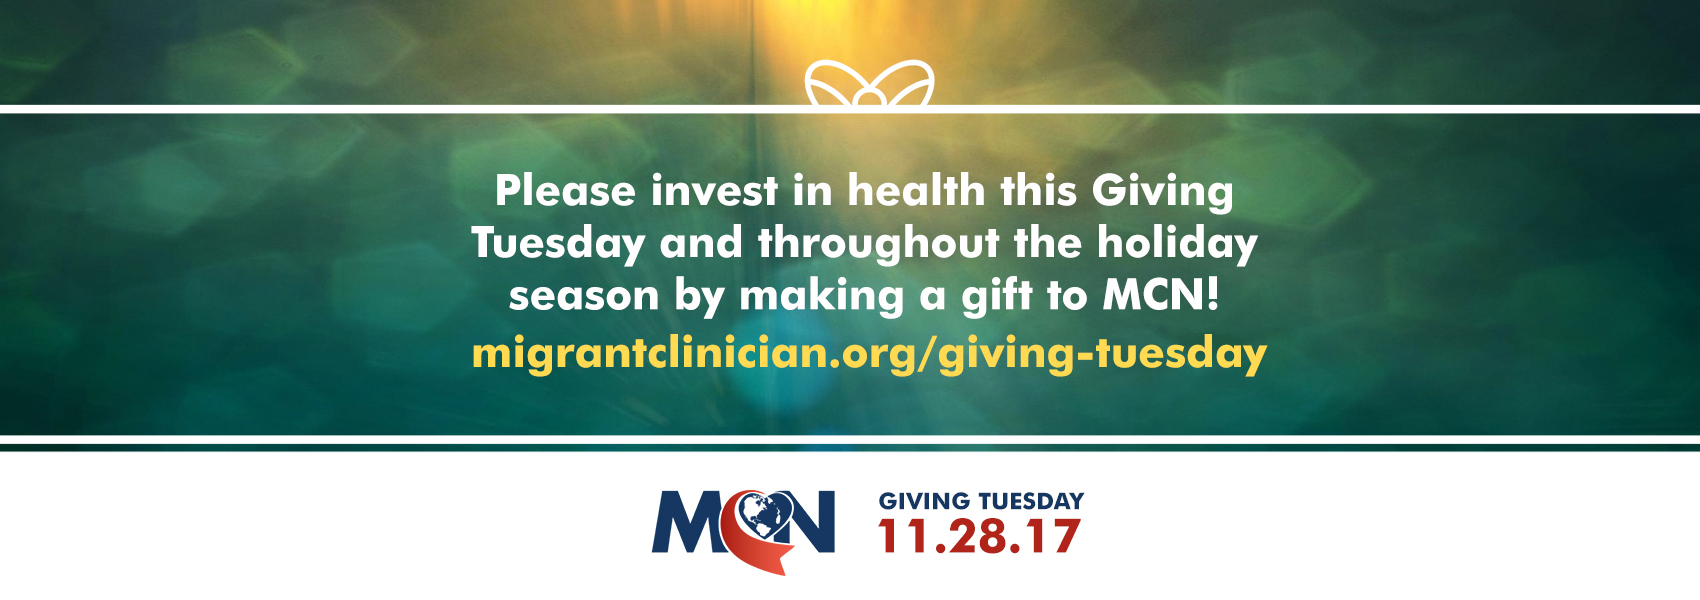 Invest in Health by making a gift to MCN!